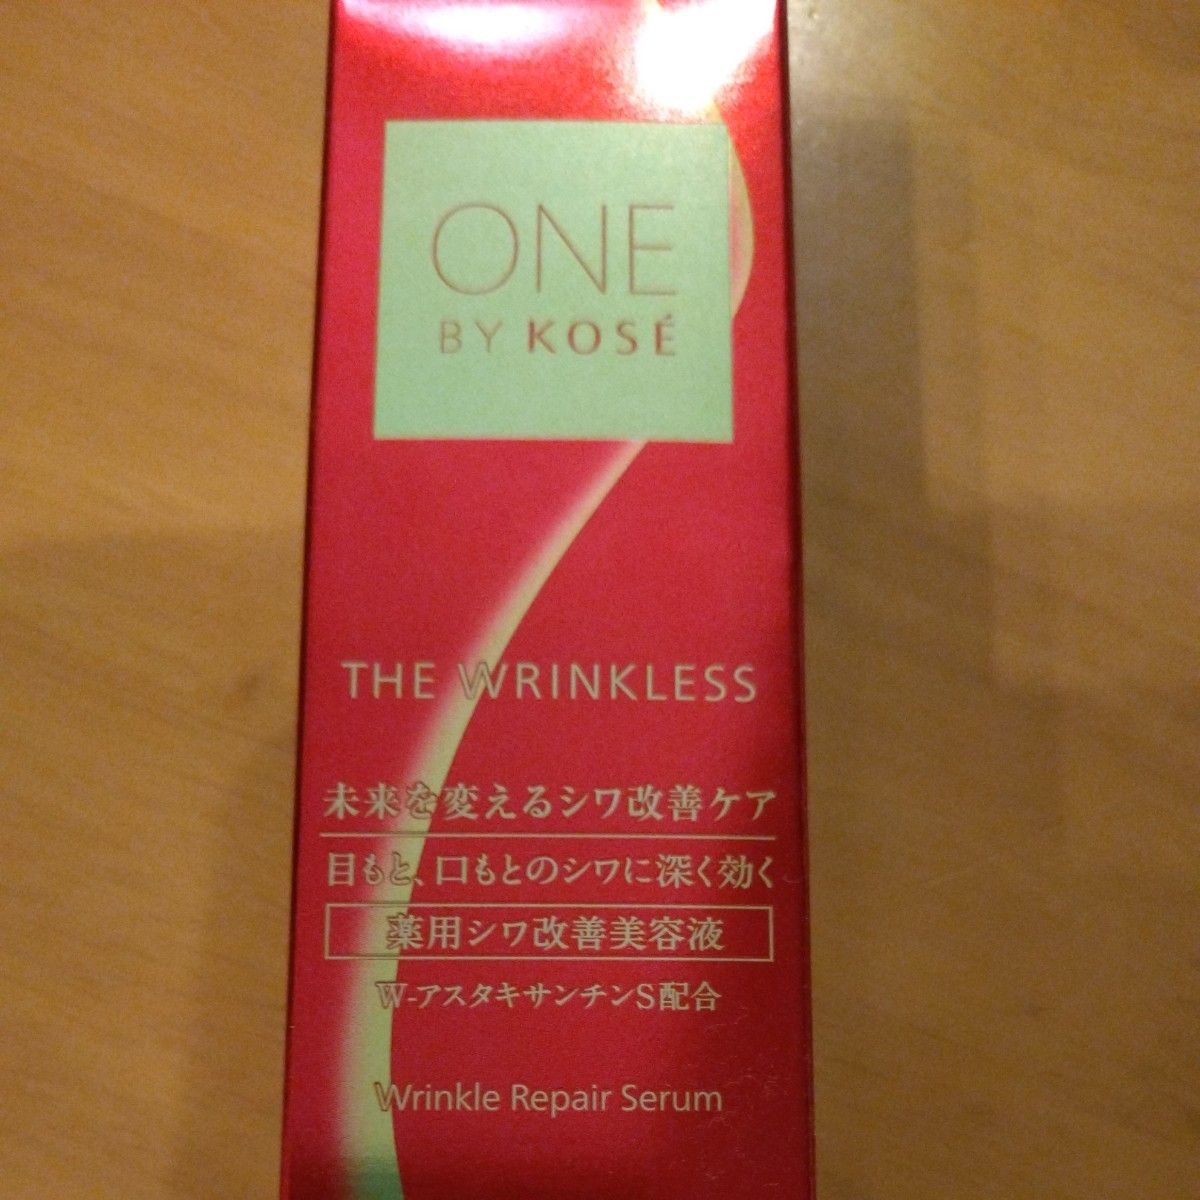 ONE BY KOSE ザ リンクレス S 20g（医薬部外品） リンクレス コーセー ONE BY KOSE 薬用シワ改善美容液